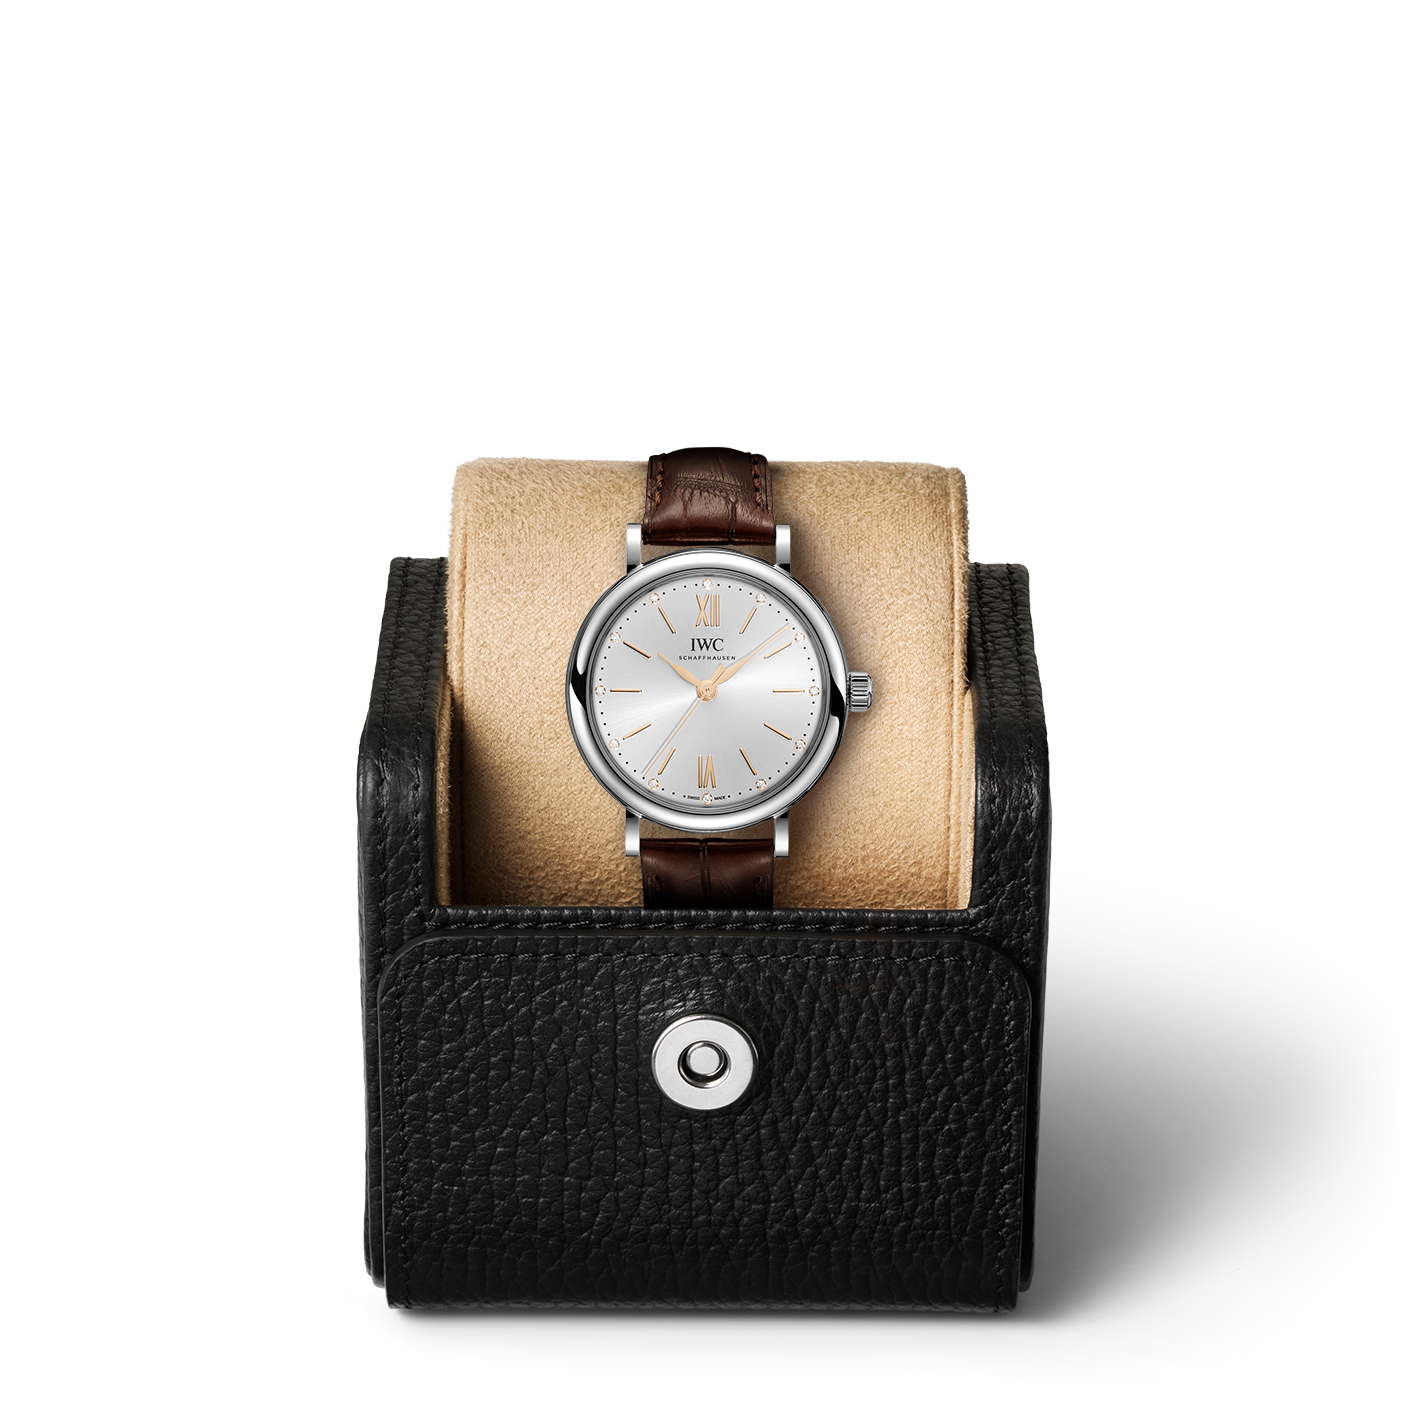 IWC Portofino Automatic Silver Dial Brown Leather Strap Watch for Women - IW357403